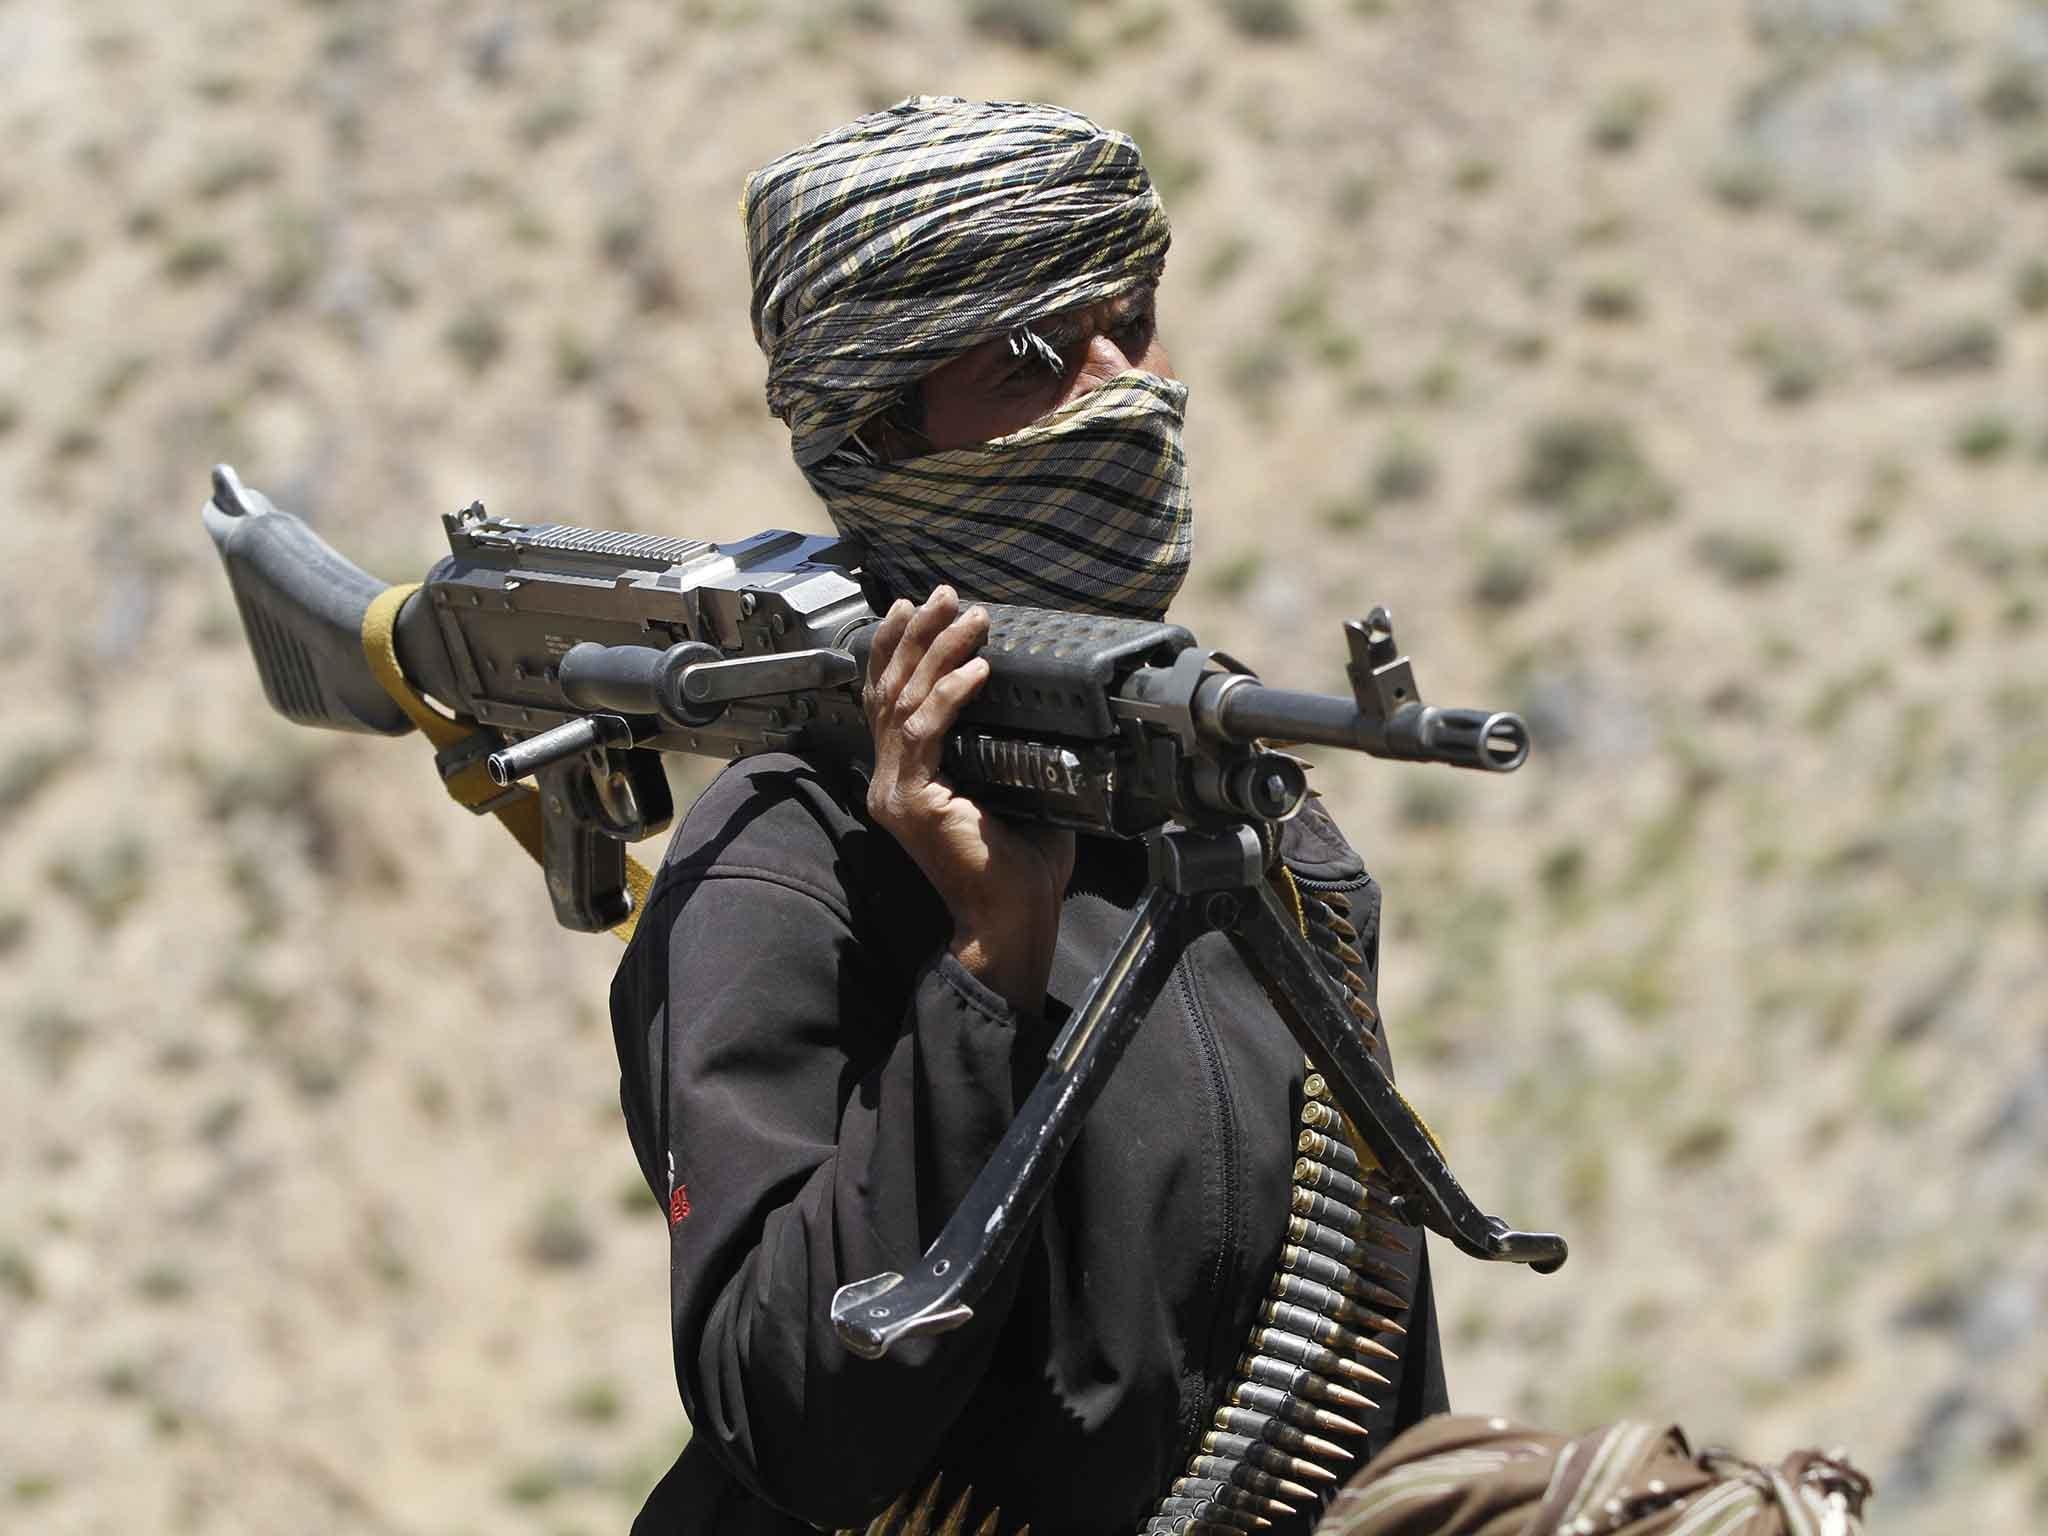 The Taliban now controls or contests around 40 per cent of Afghanistan